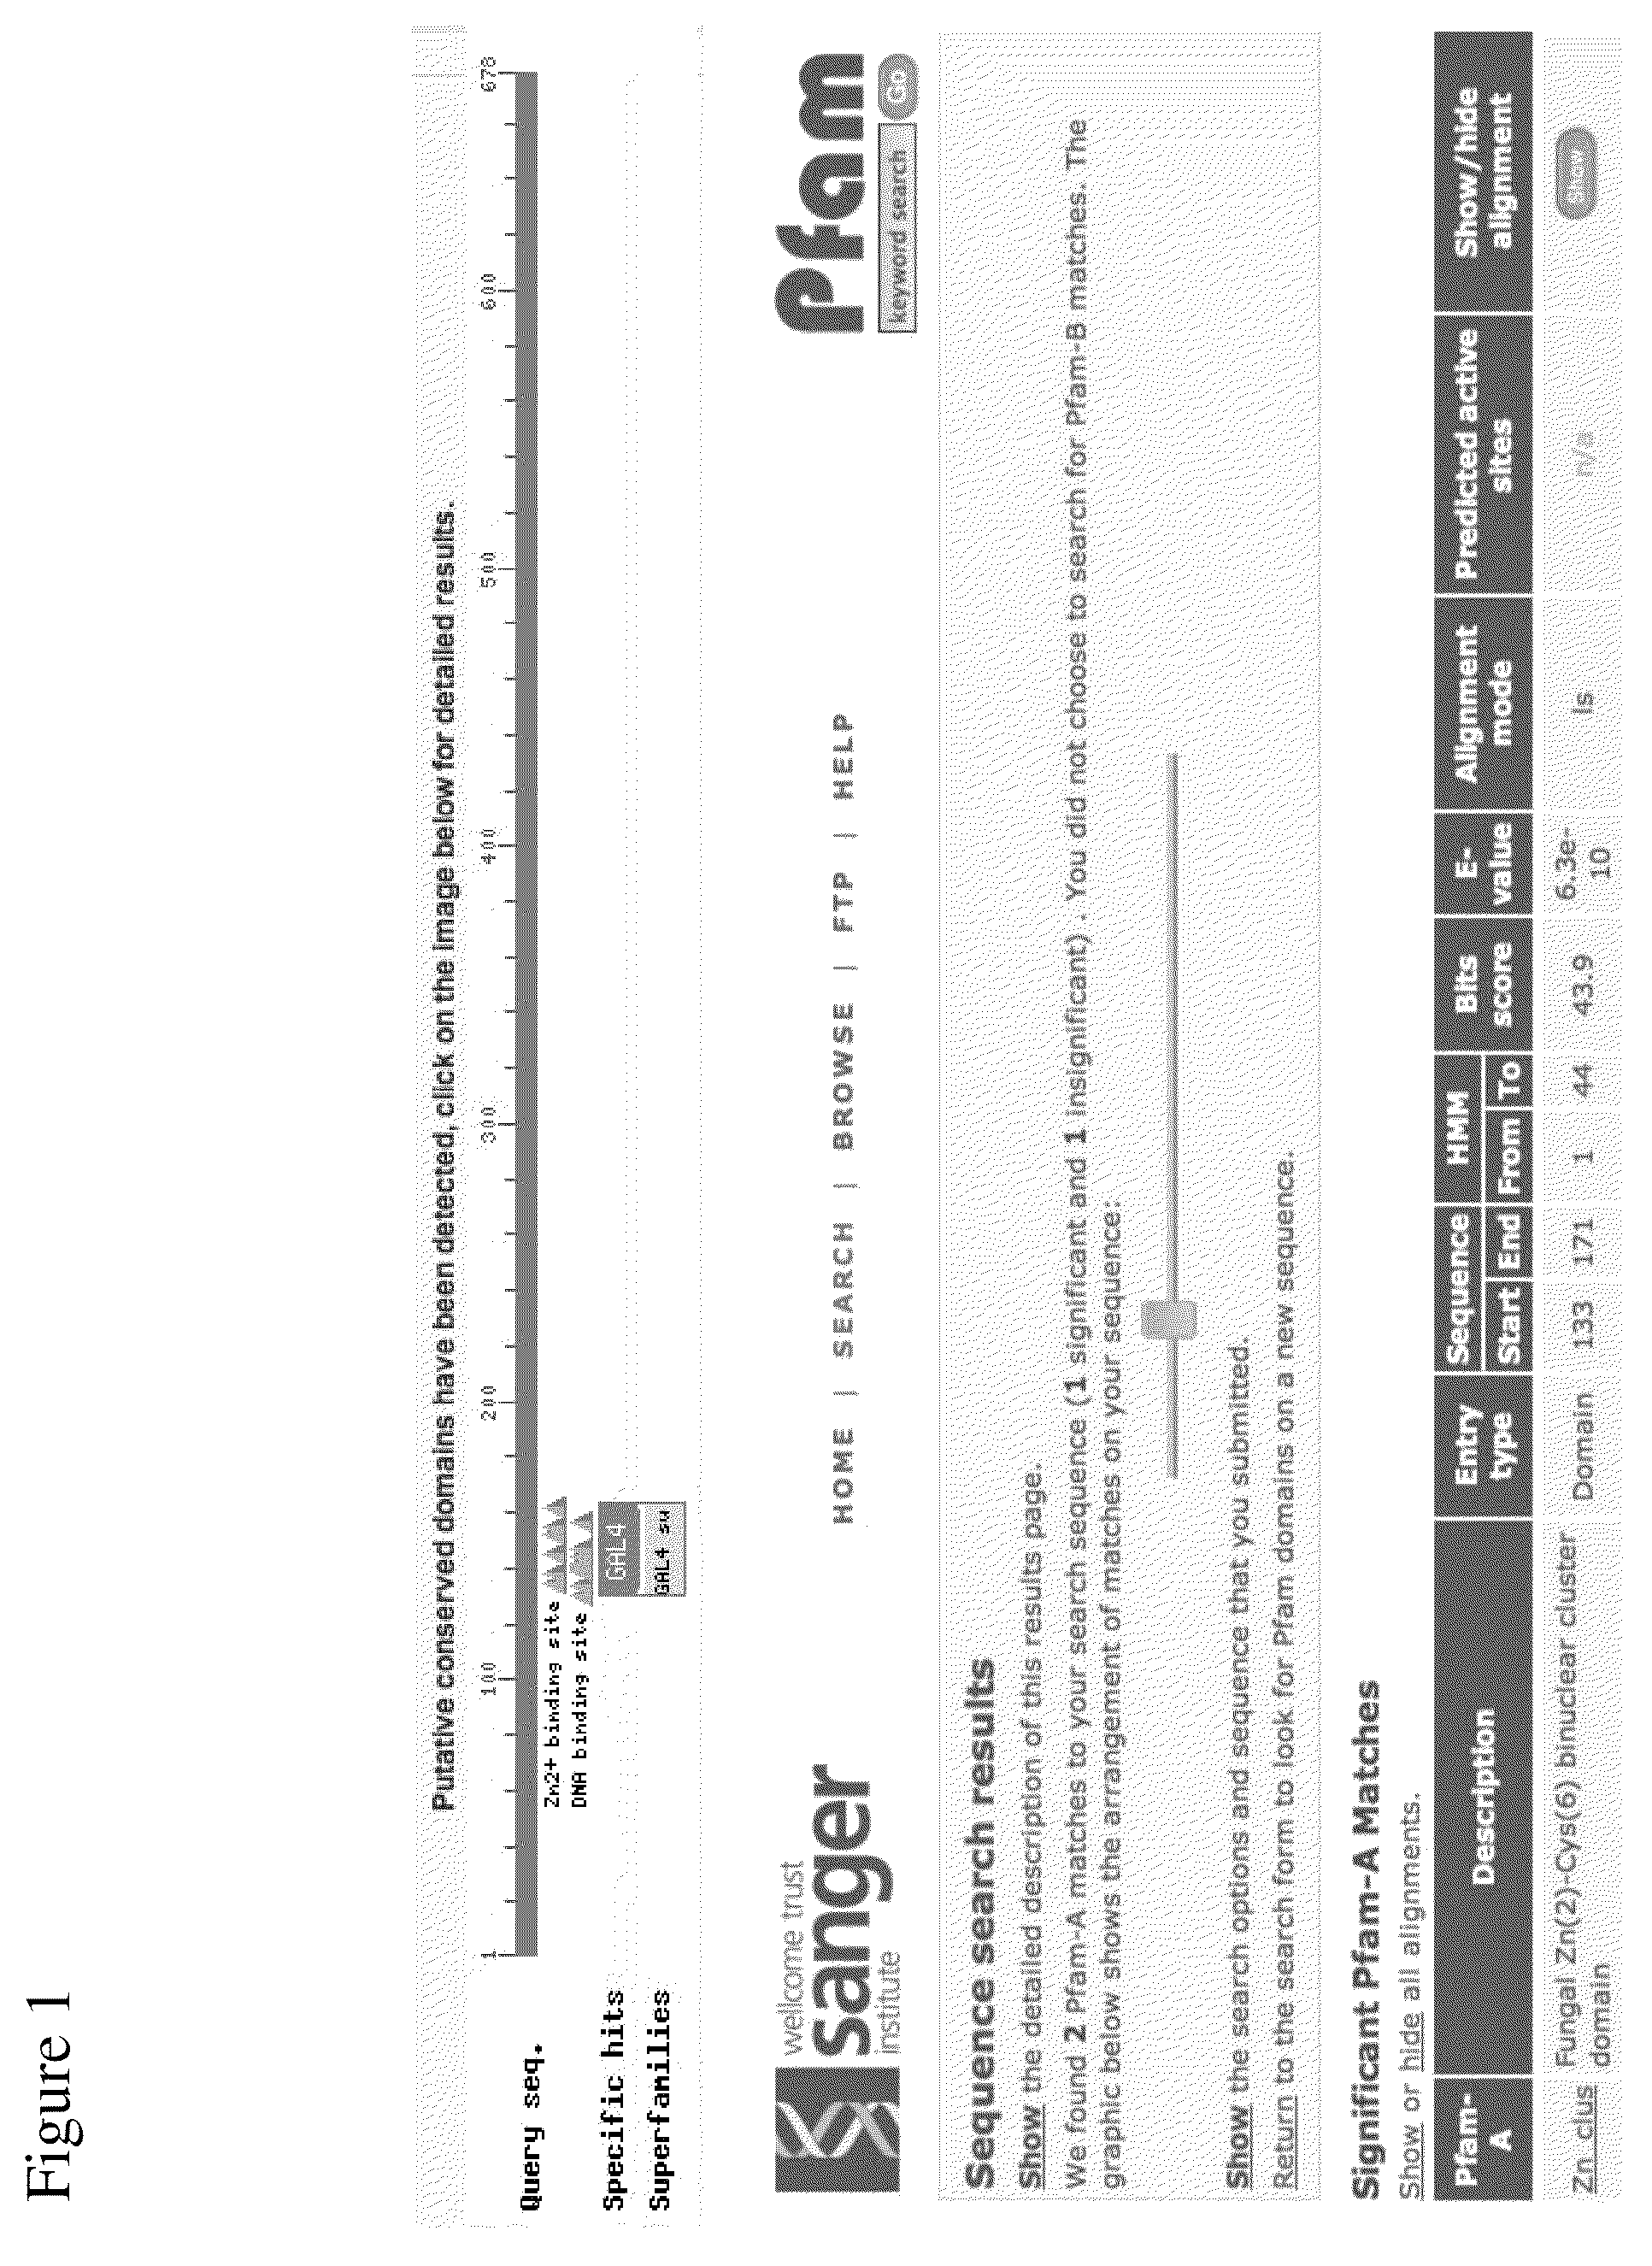 Methods and compositions for improving sugar transport, mixed sugar fermentation, and production of biofuels